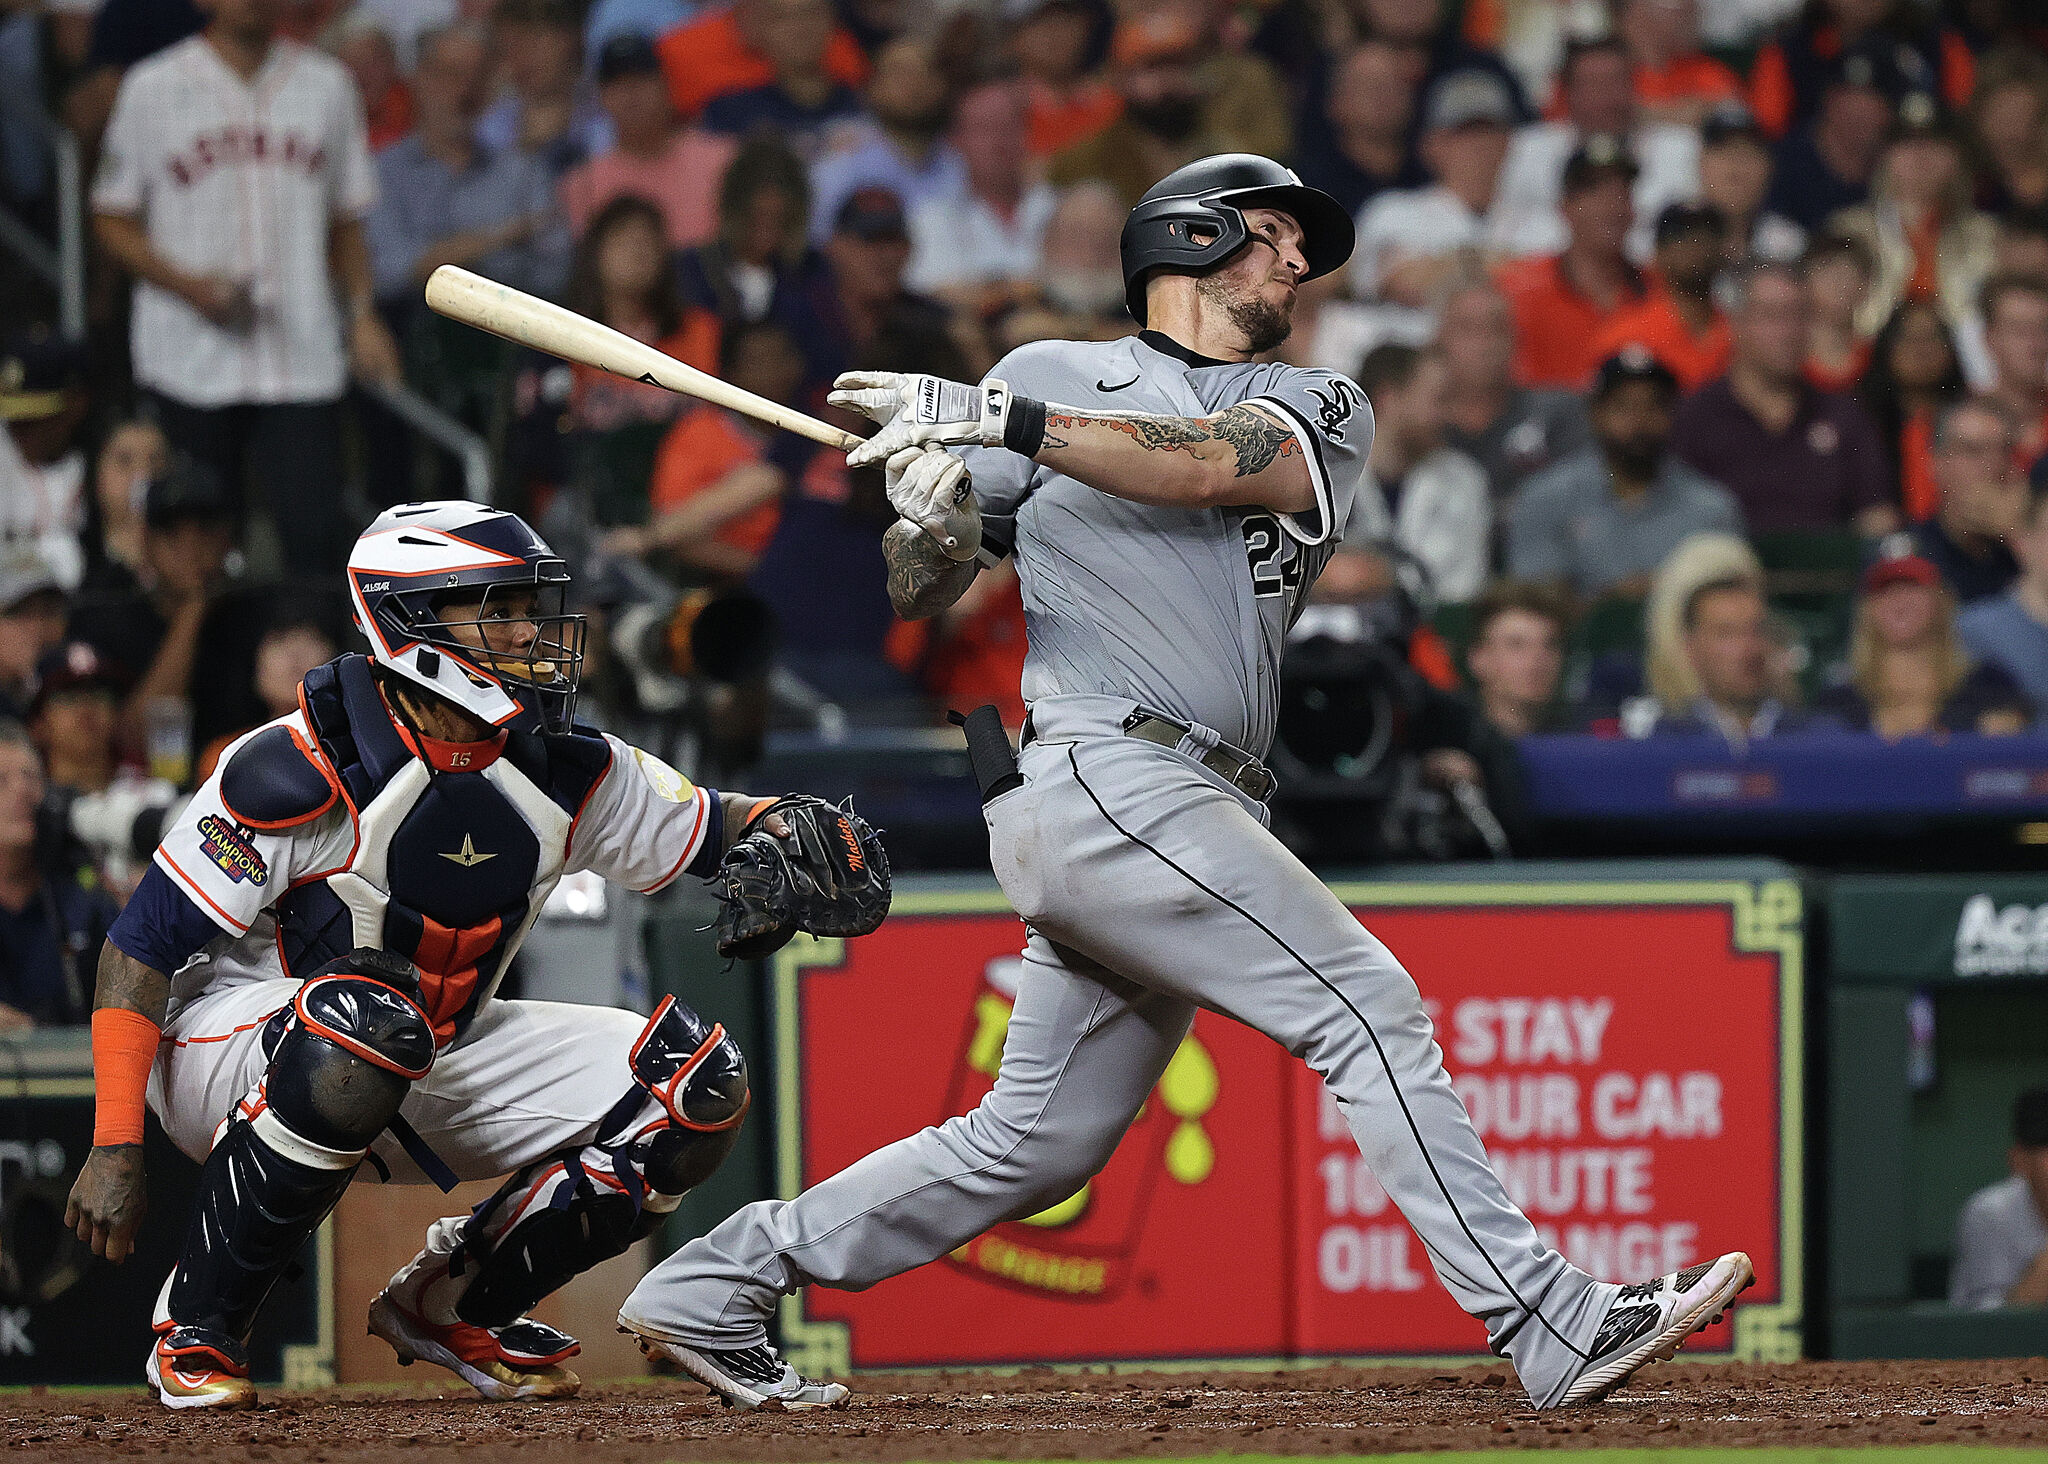 Lowly Astros blank first-place Sox